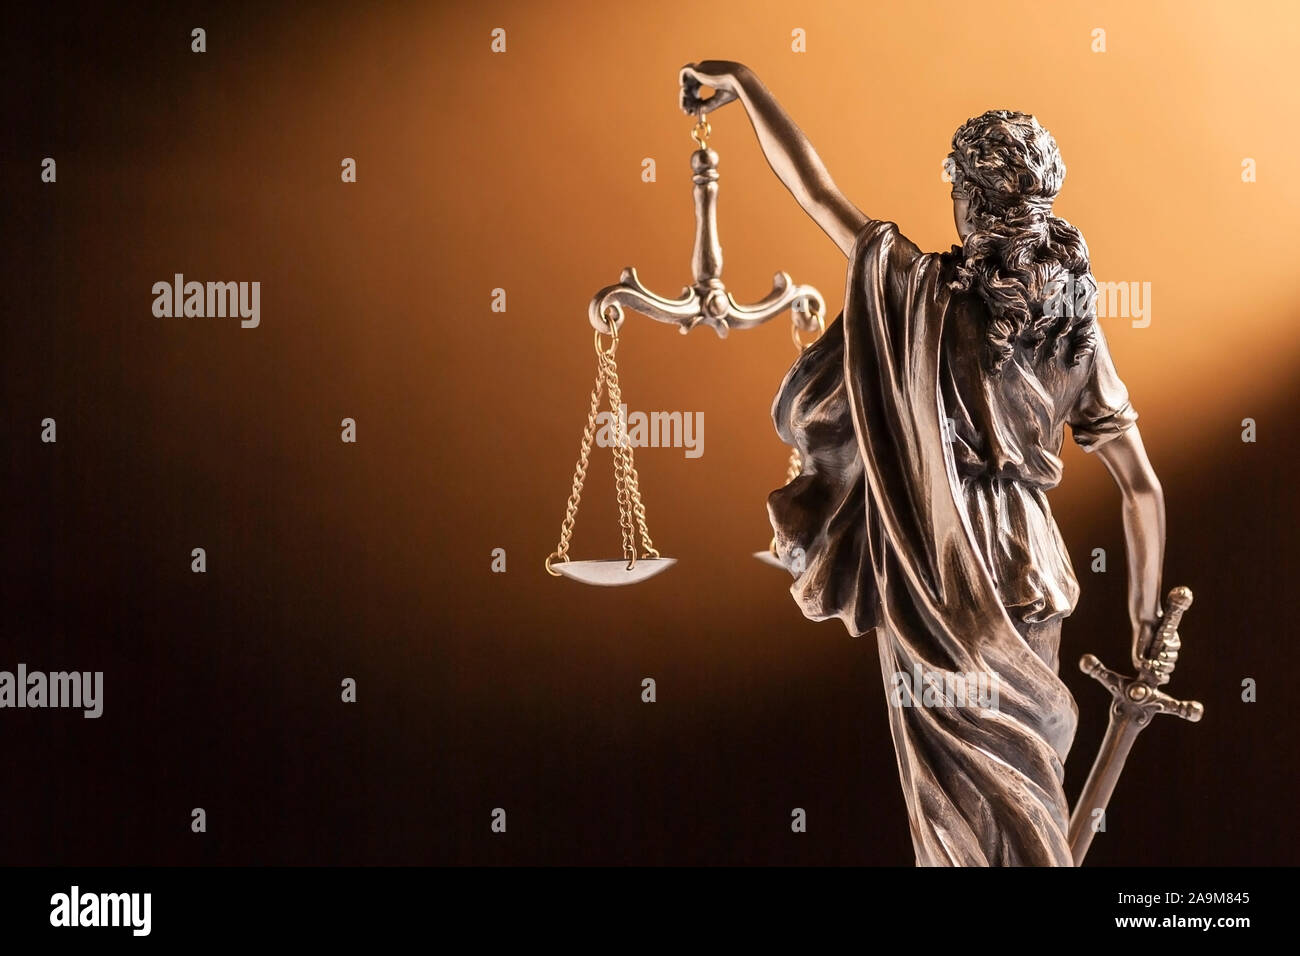 Rear view of of a small bronze figurine of Justice holding up the scales of law and order and carrying a sword facing towards blank copy space on brow Stock Photo